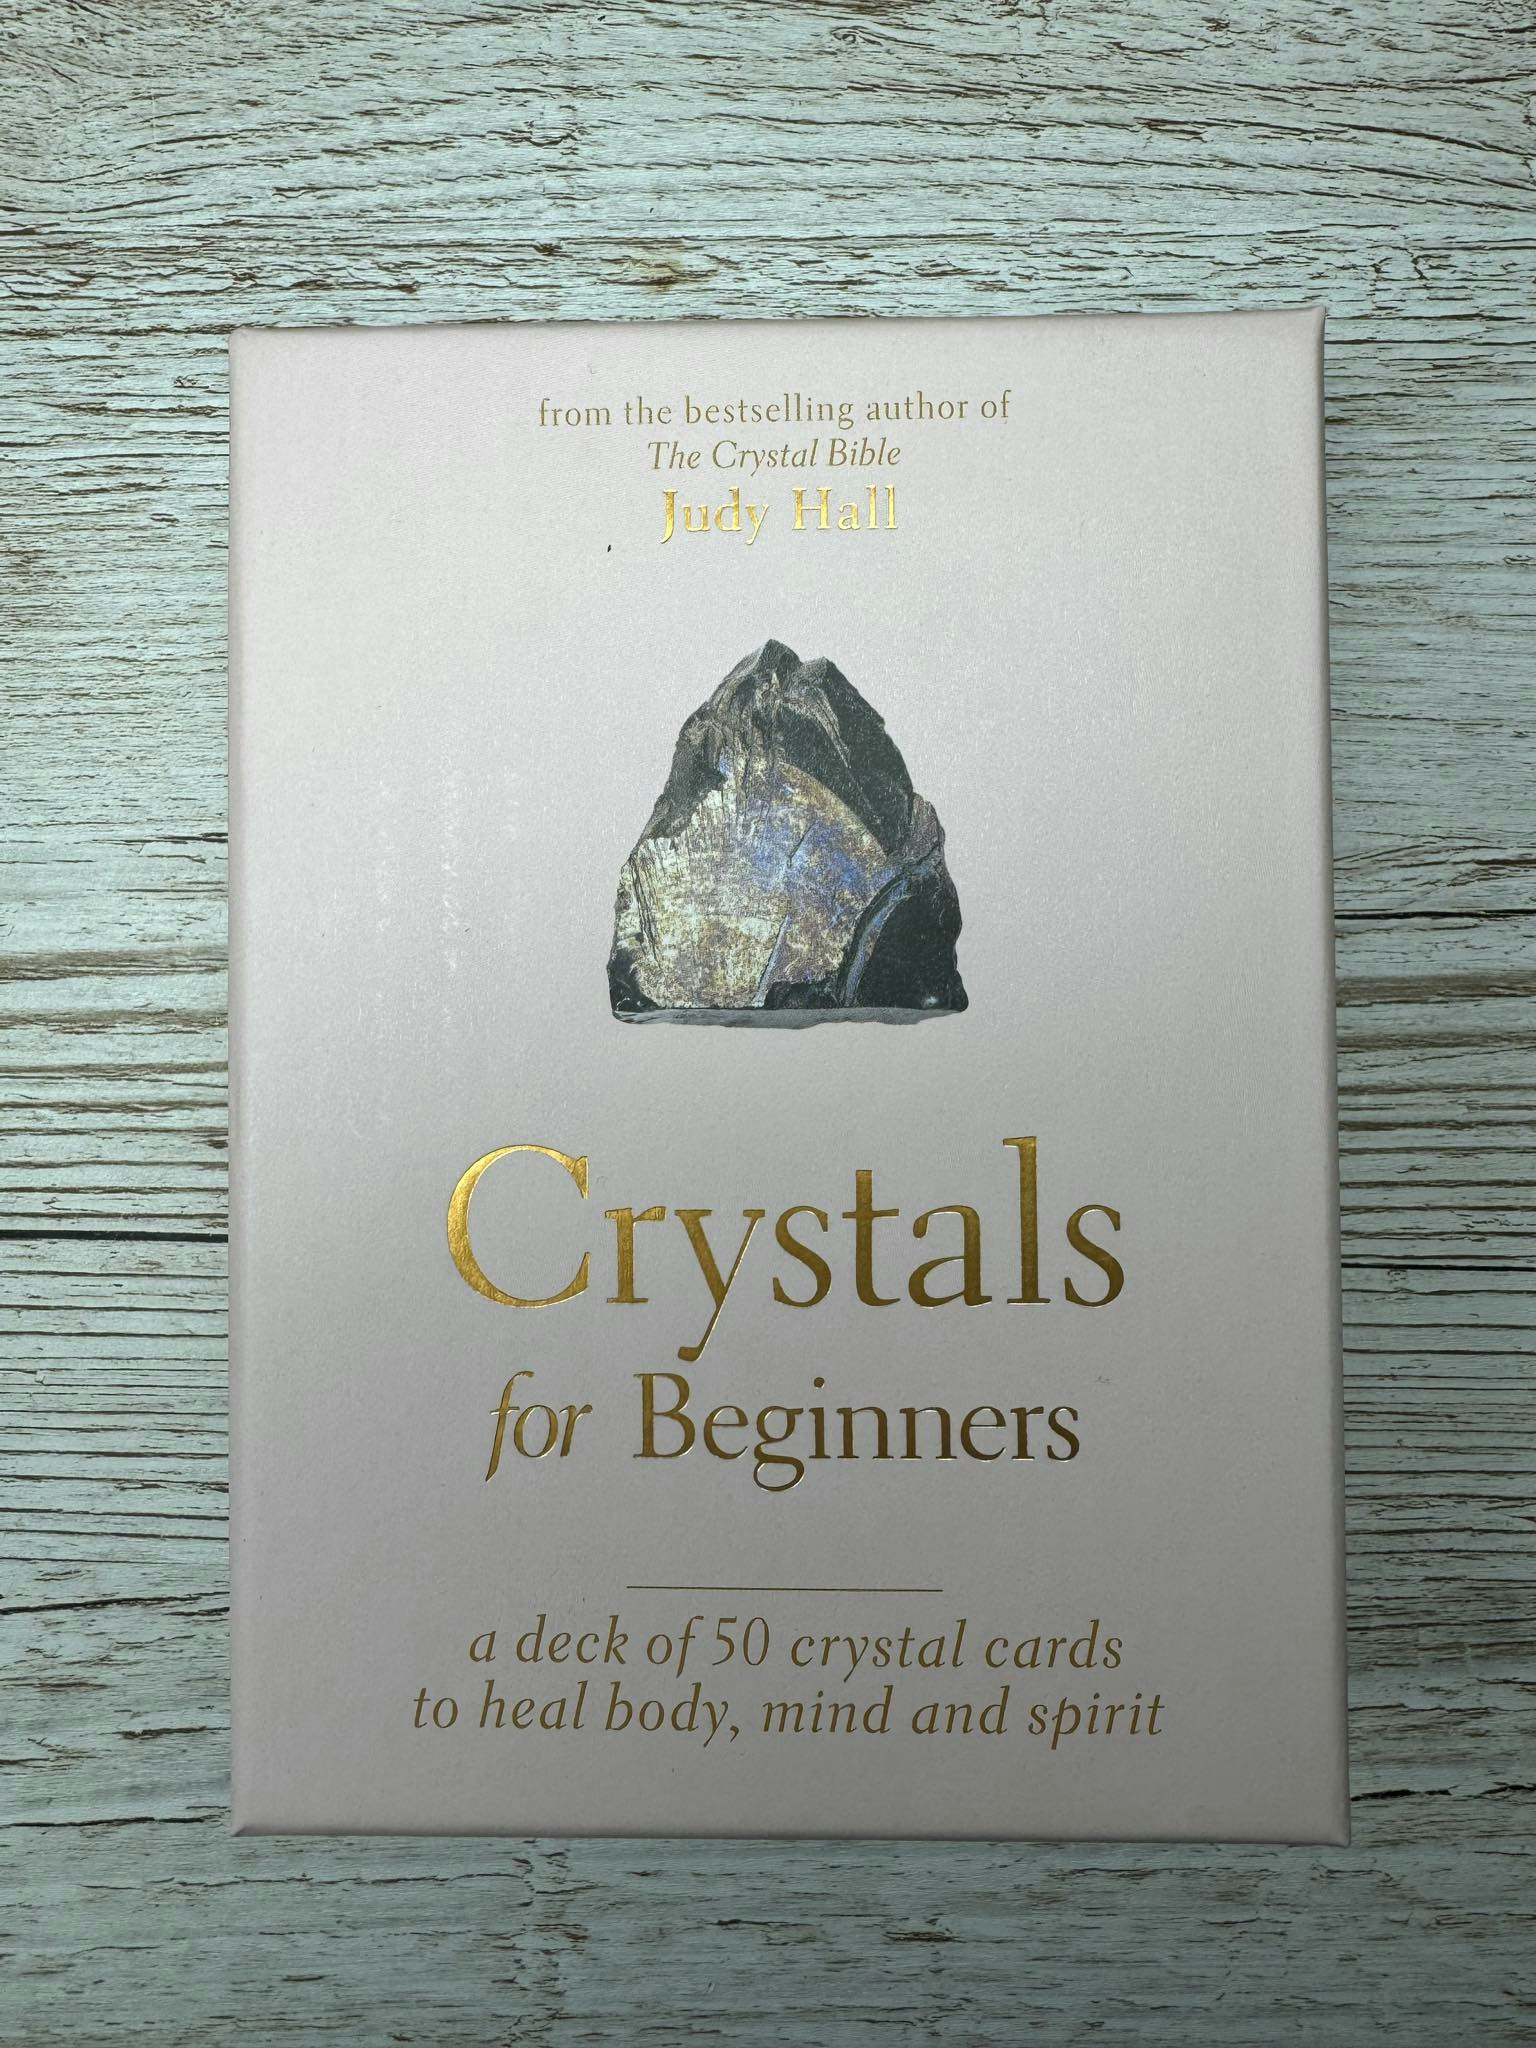 Crystals for beginners (a card deck)